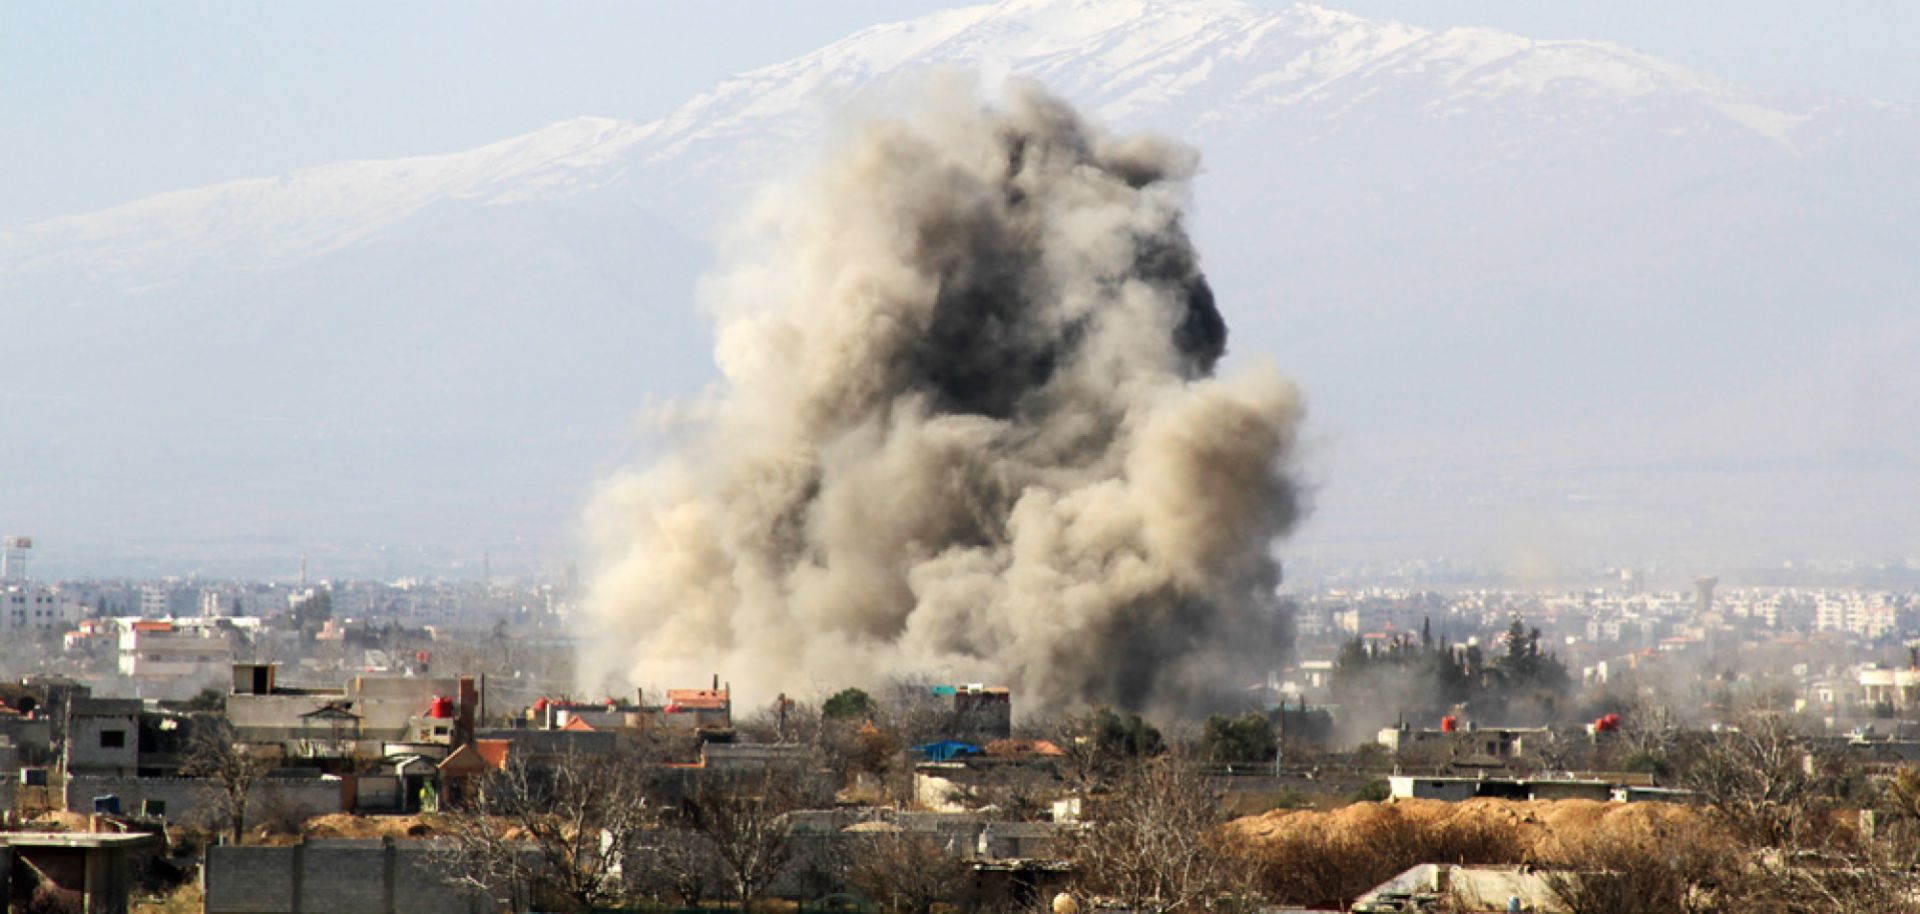 Smoke ascends after a Syrian military helicopter allegedly dropped a barrel bomb over the city of Daraya on Jan. 31.